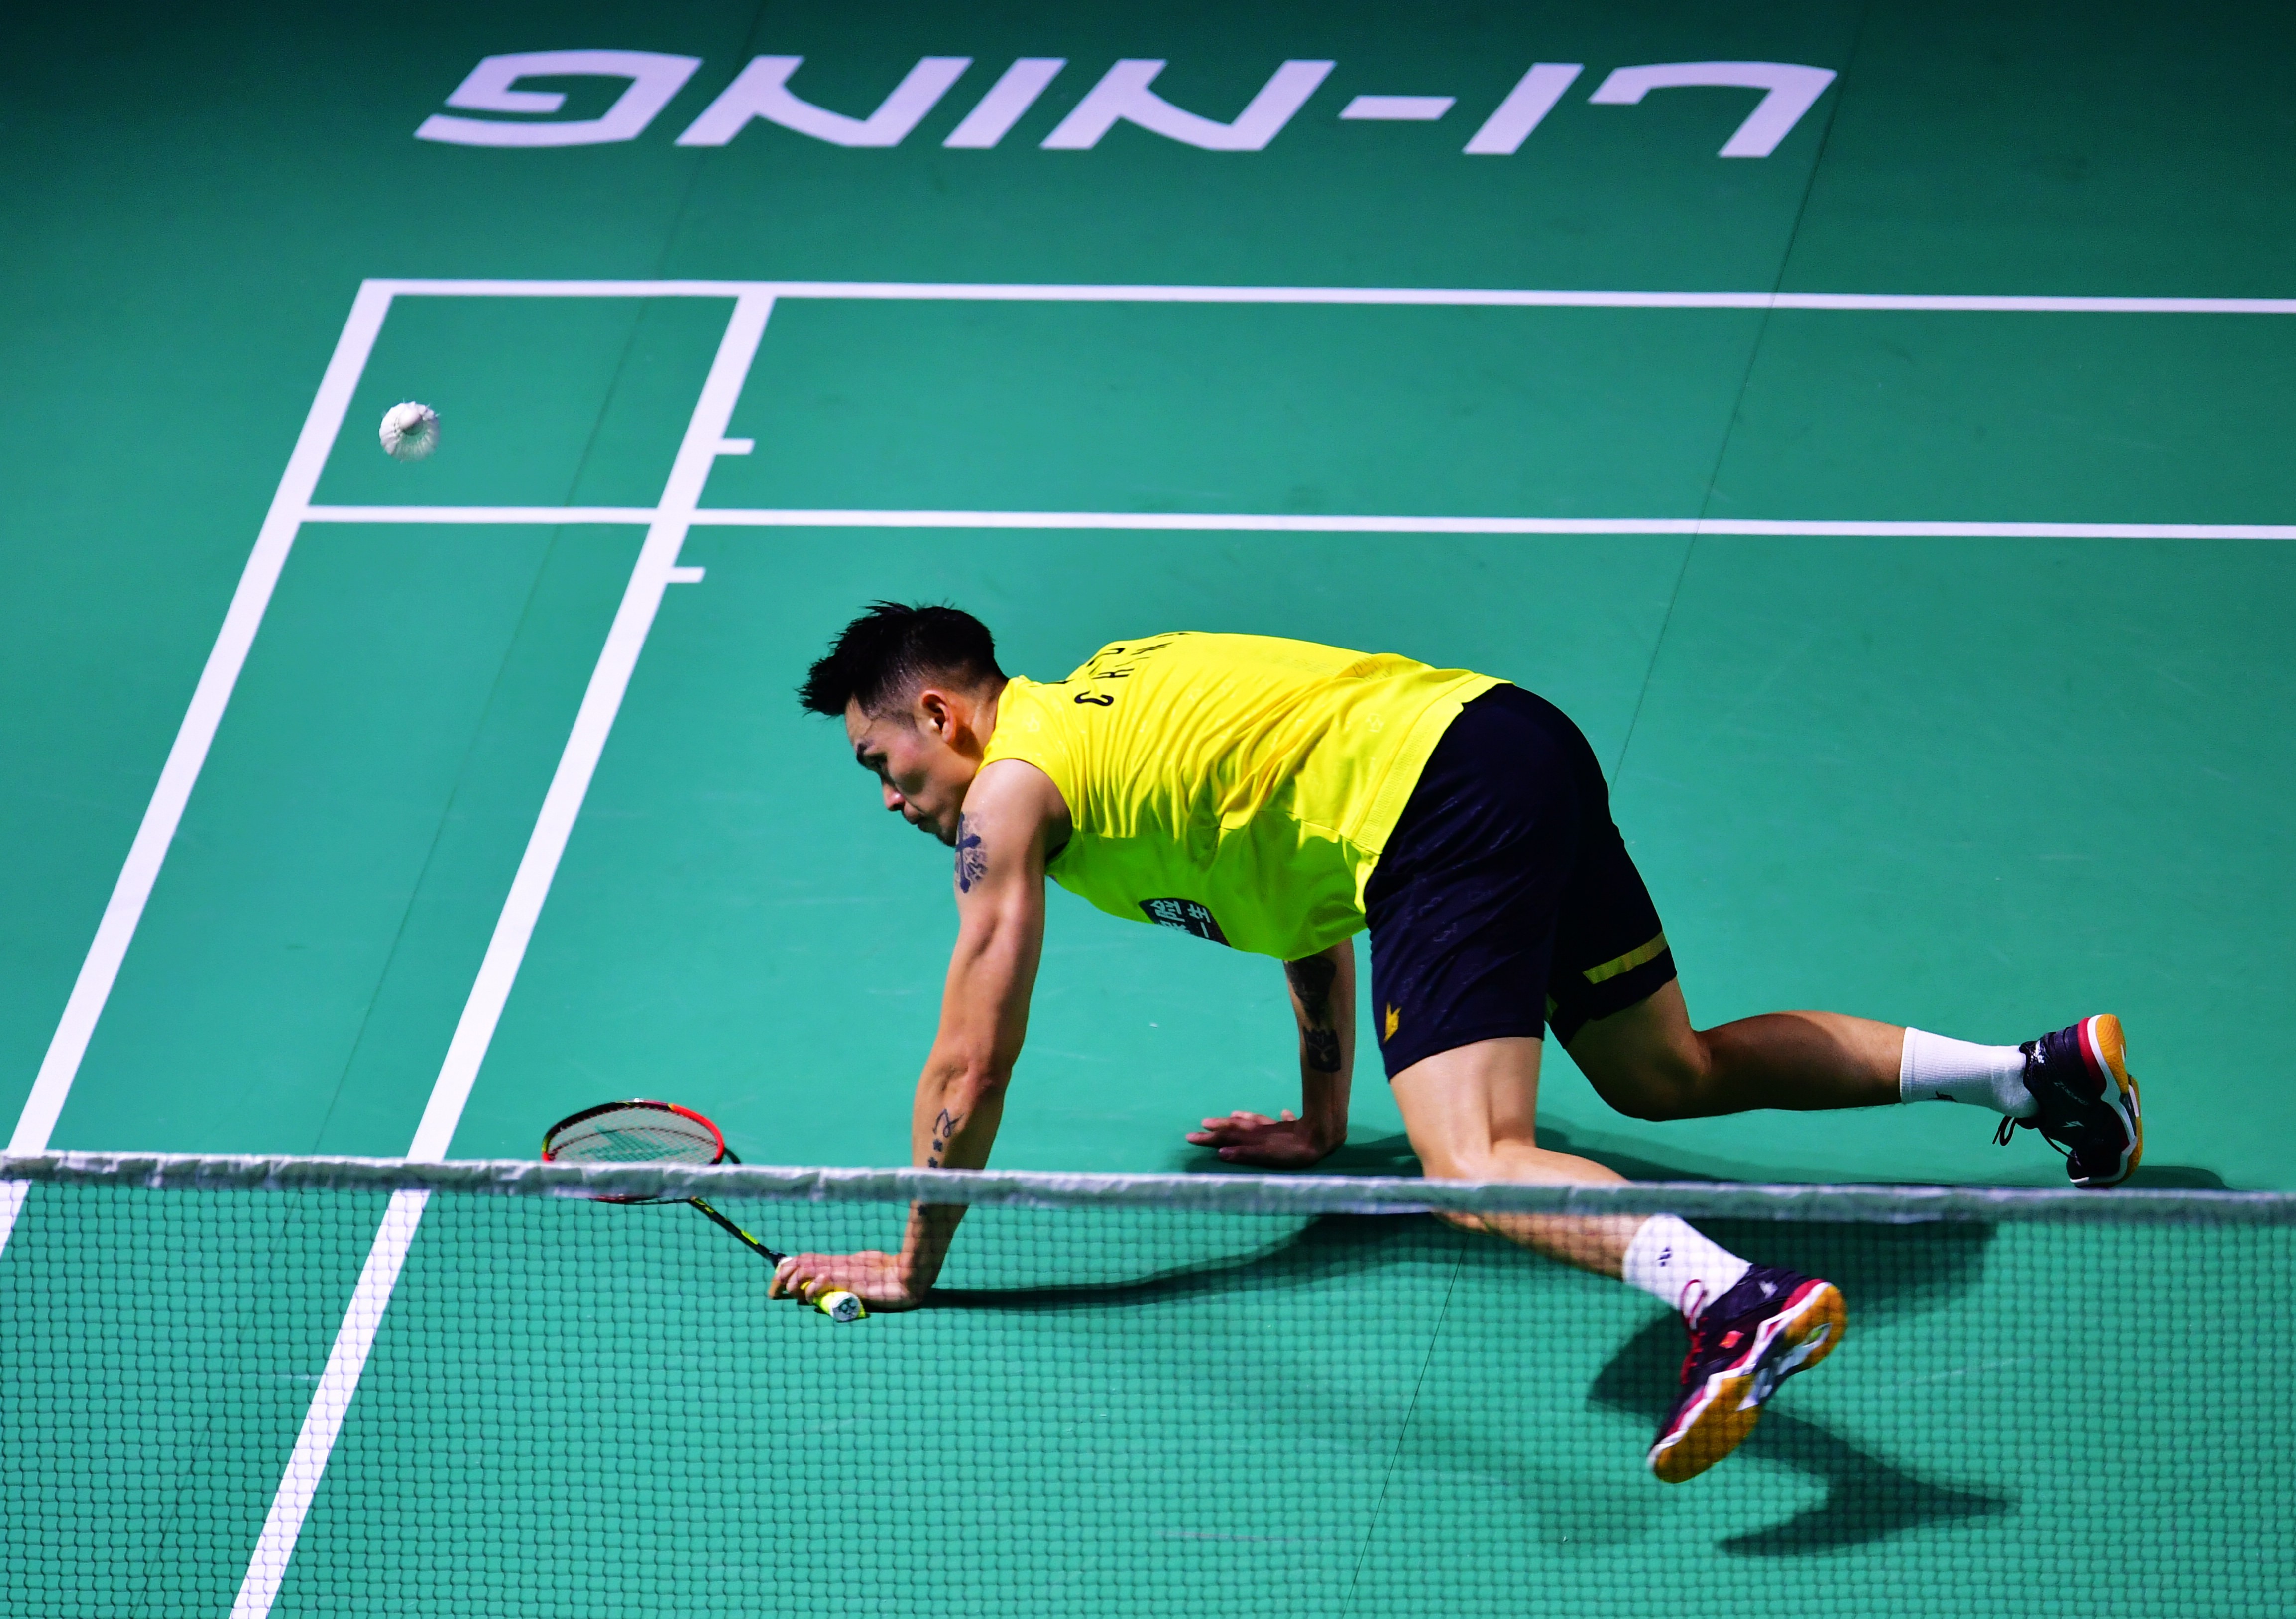 Down and out ... China’s Lin Dan slips during his first-round defeat at the China Open on Wednesday. Photos: Xinhua